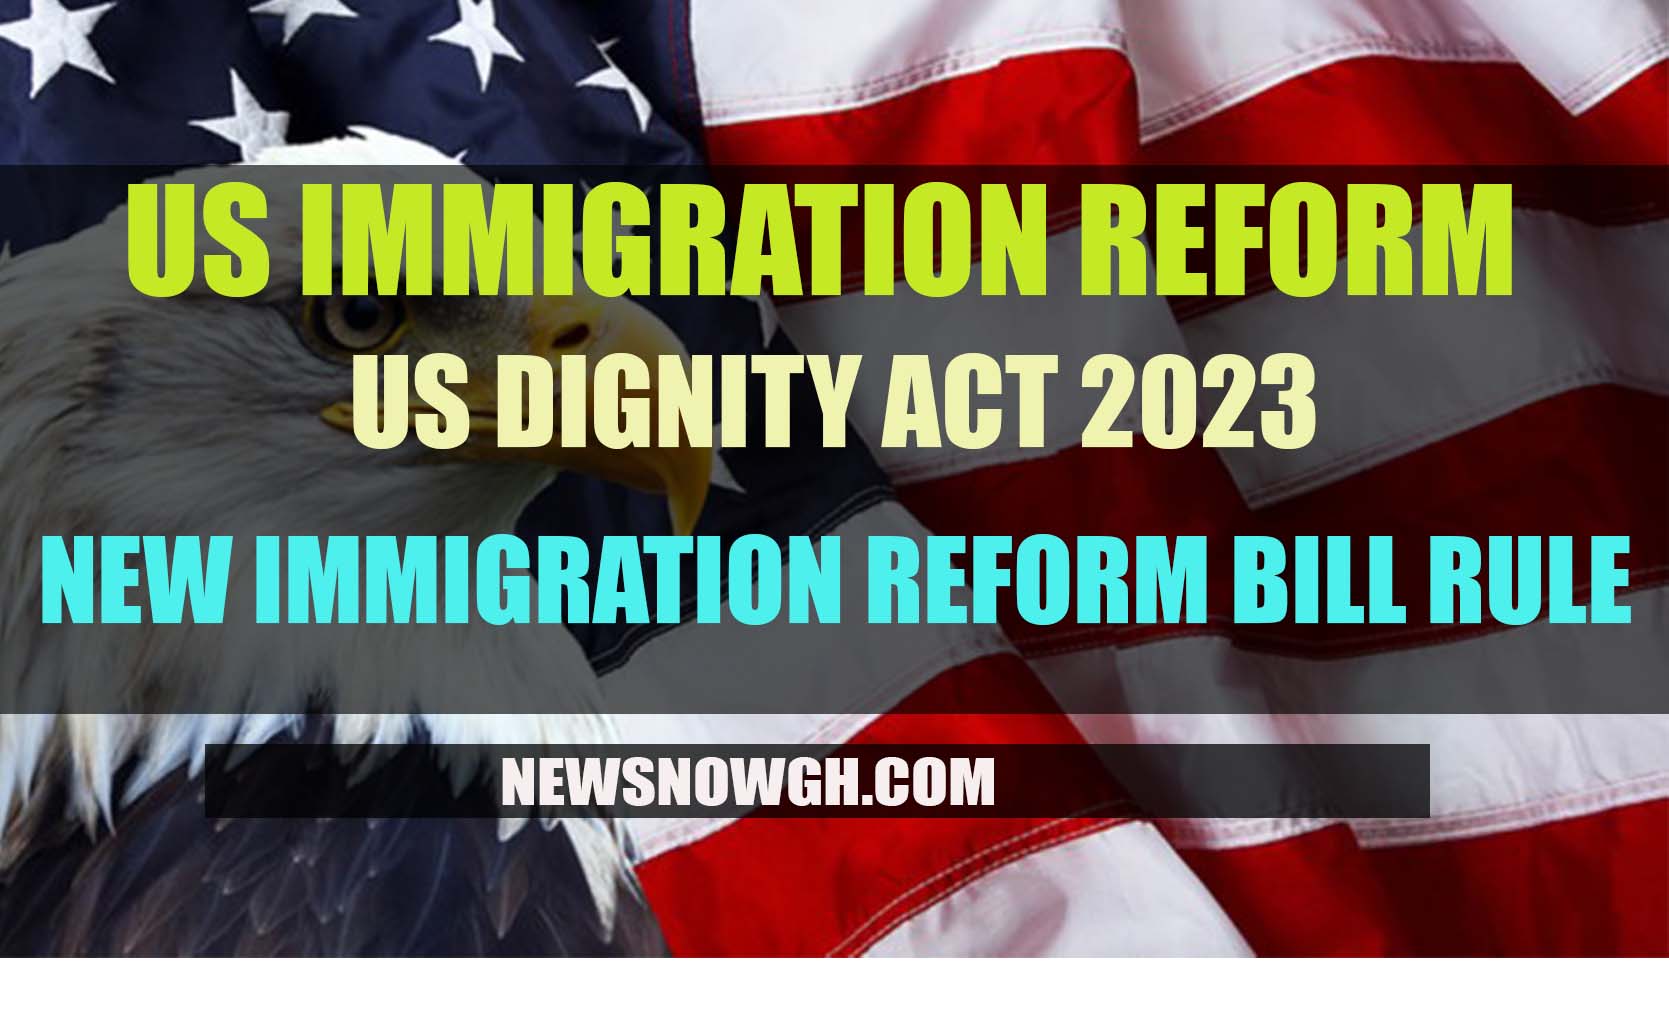 US Dignity Act 2023 New Immigration Reform Bill